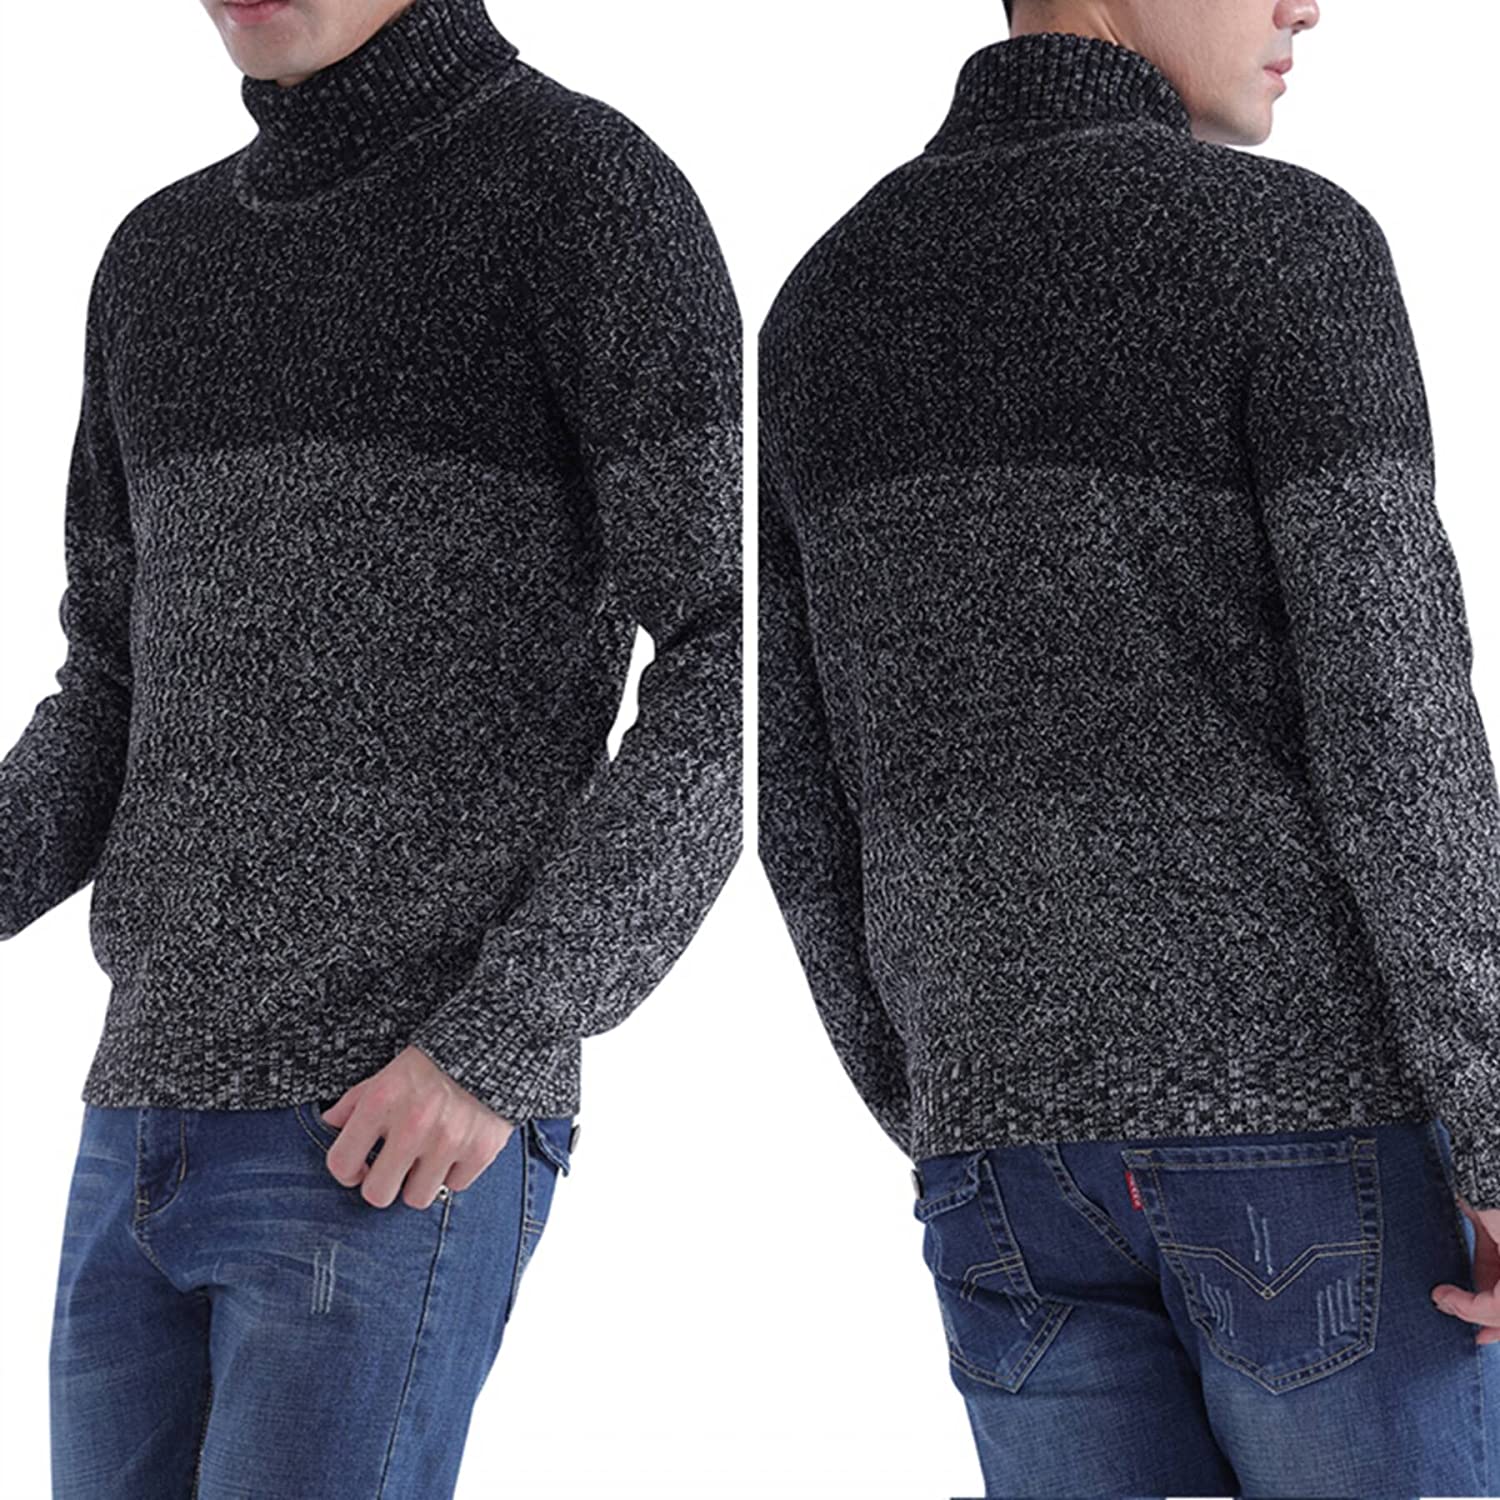 LongPing Mens Winter Fashion Turtleneck Pullover Crewneck Striped Sweater Soft Thermal Casual Cotton Twisted Knitted